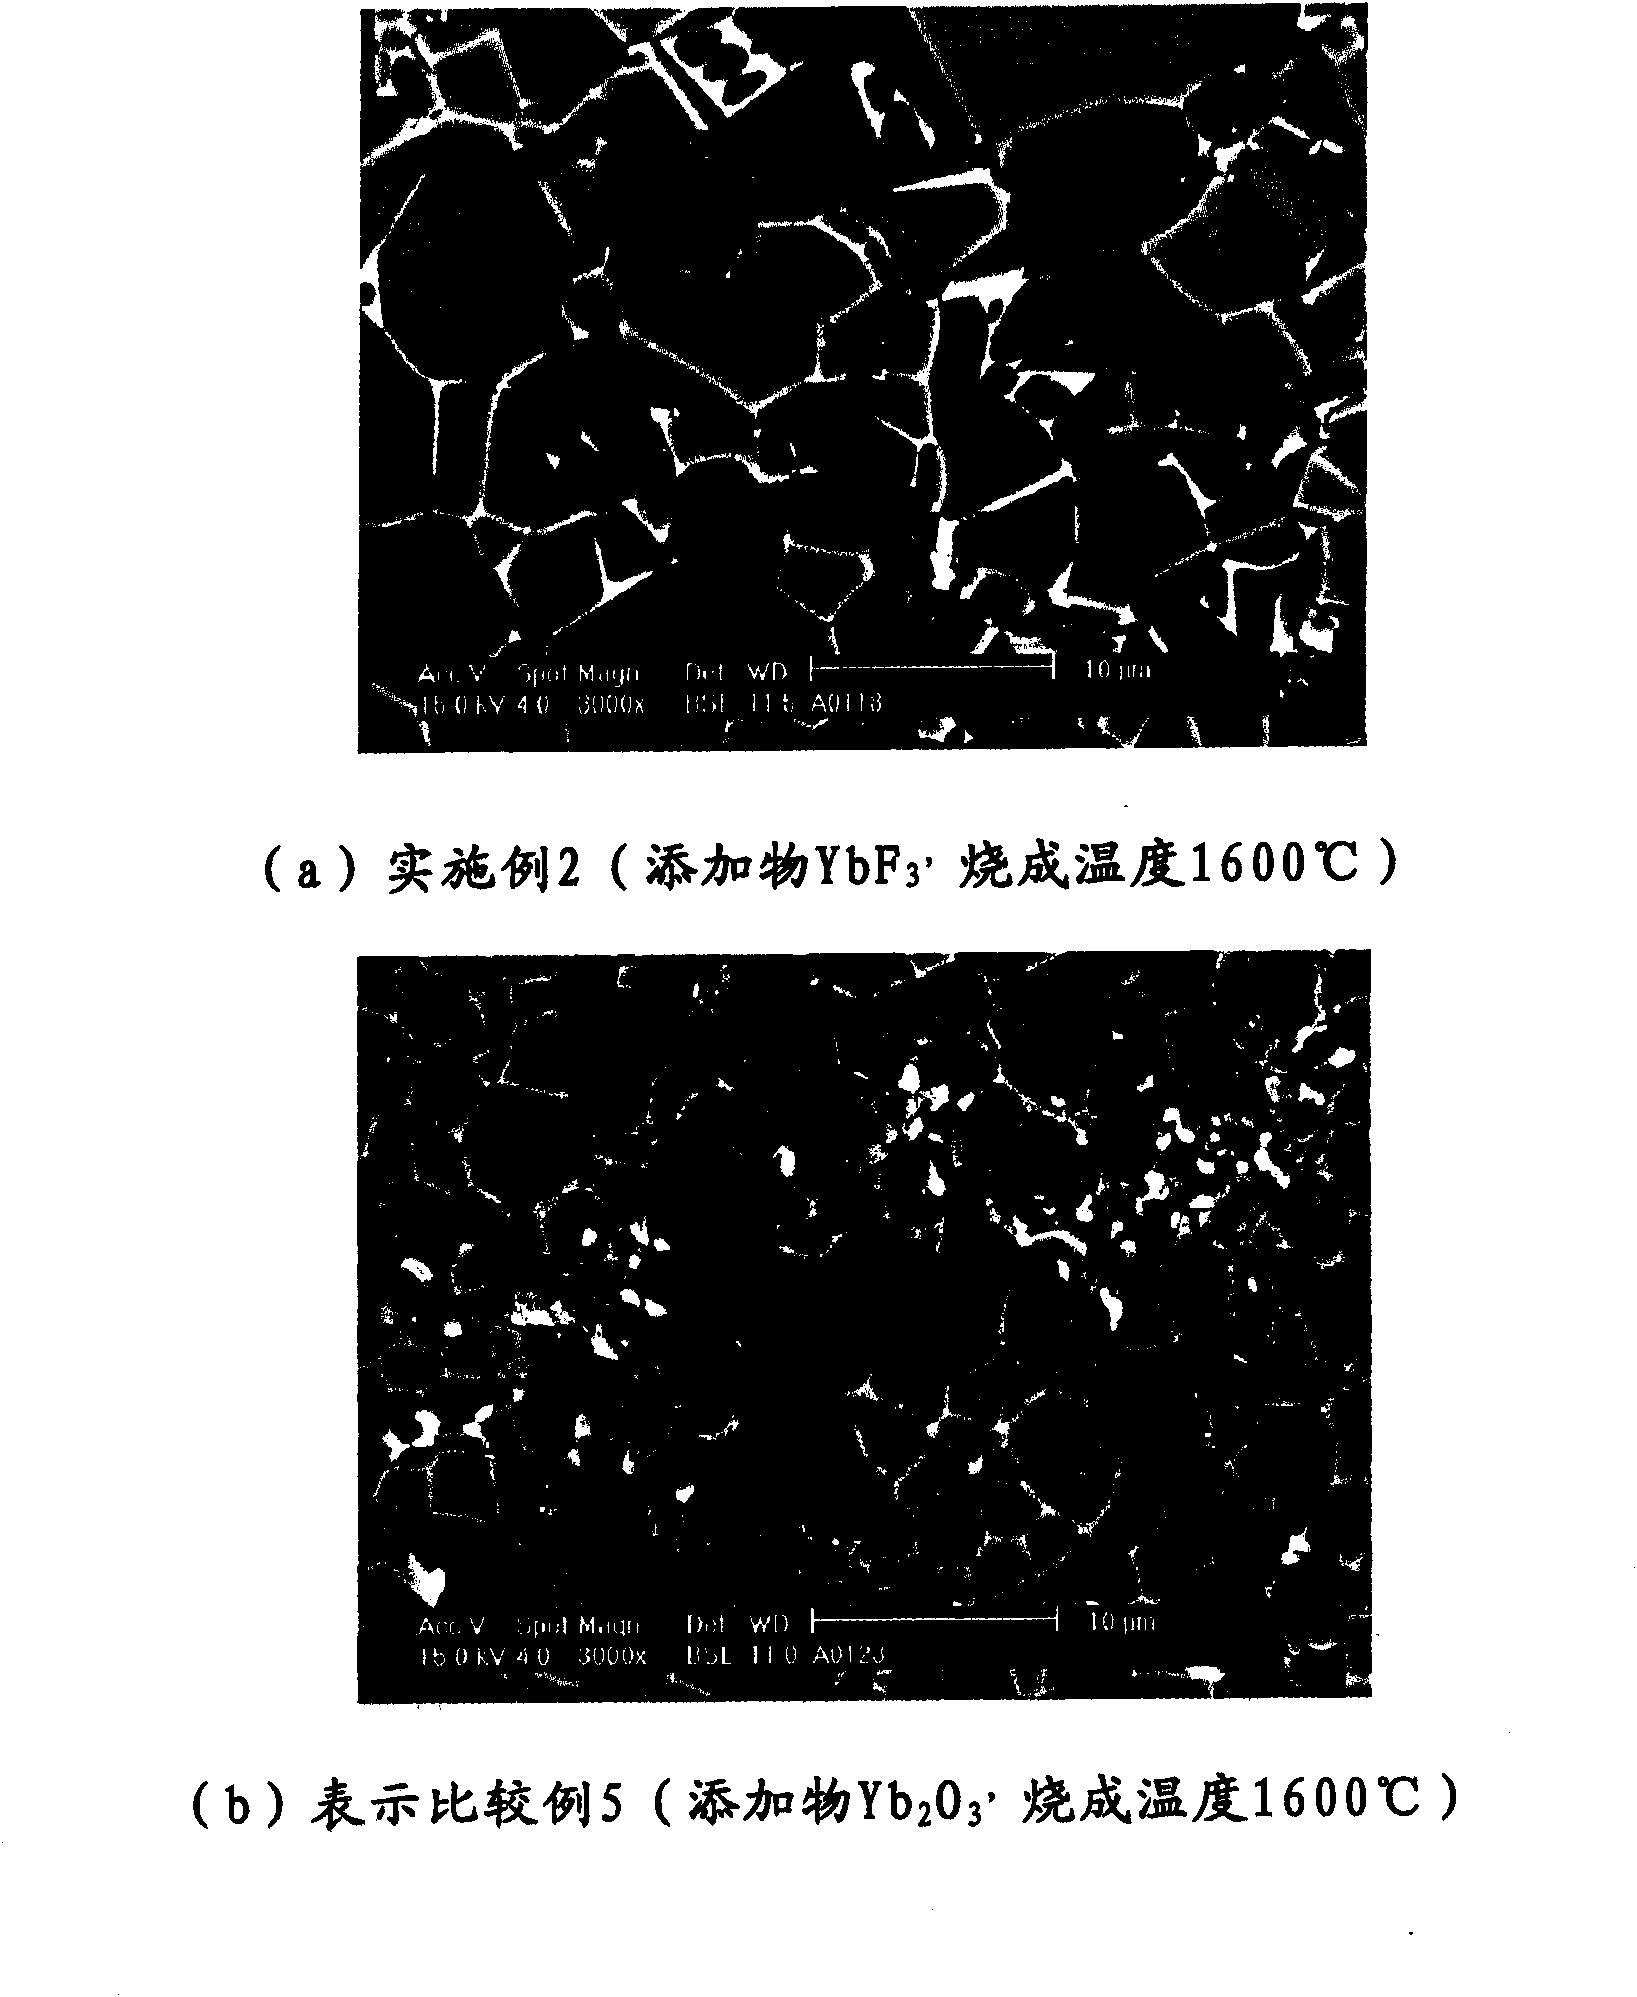 Aluminum oxide sintered product and method for producing the same